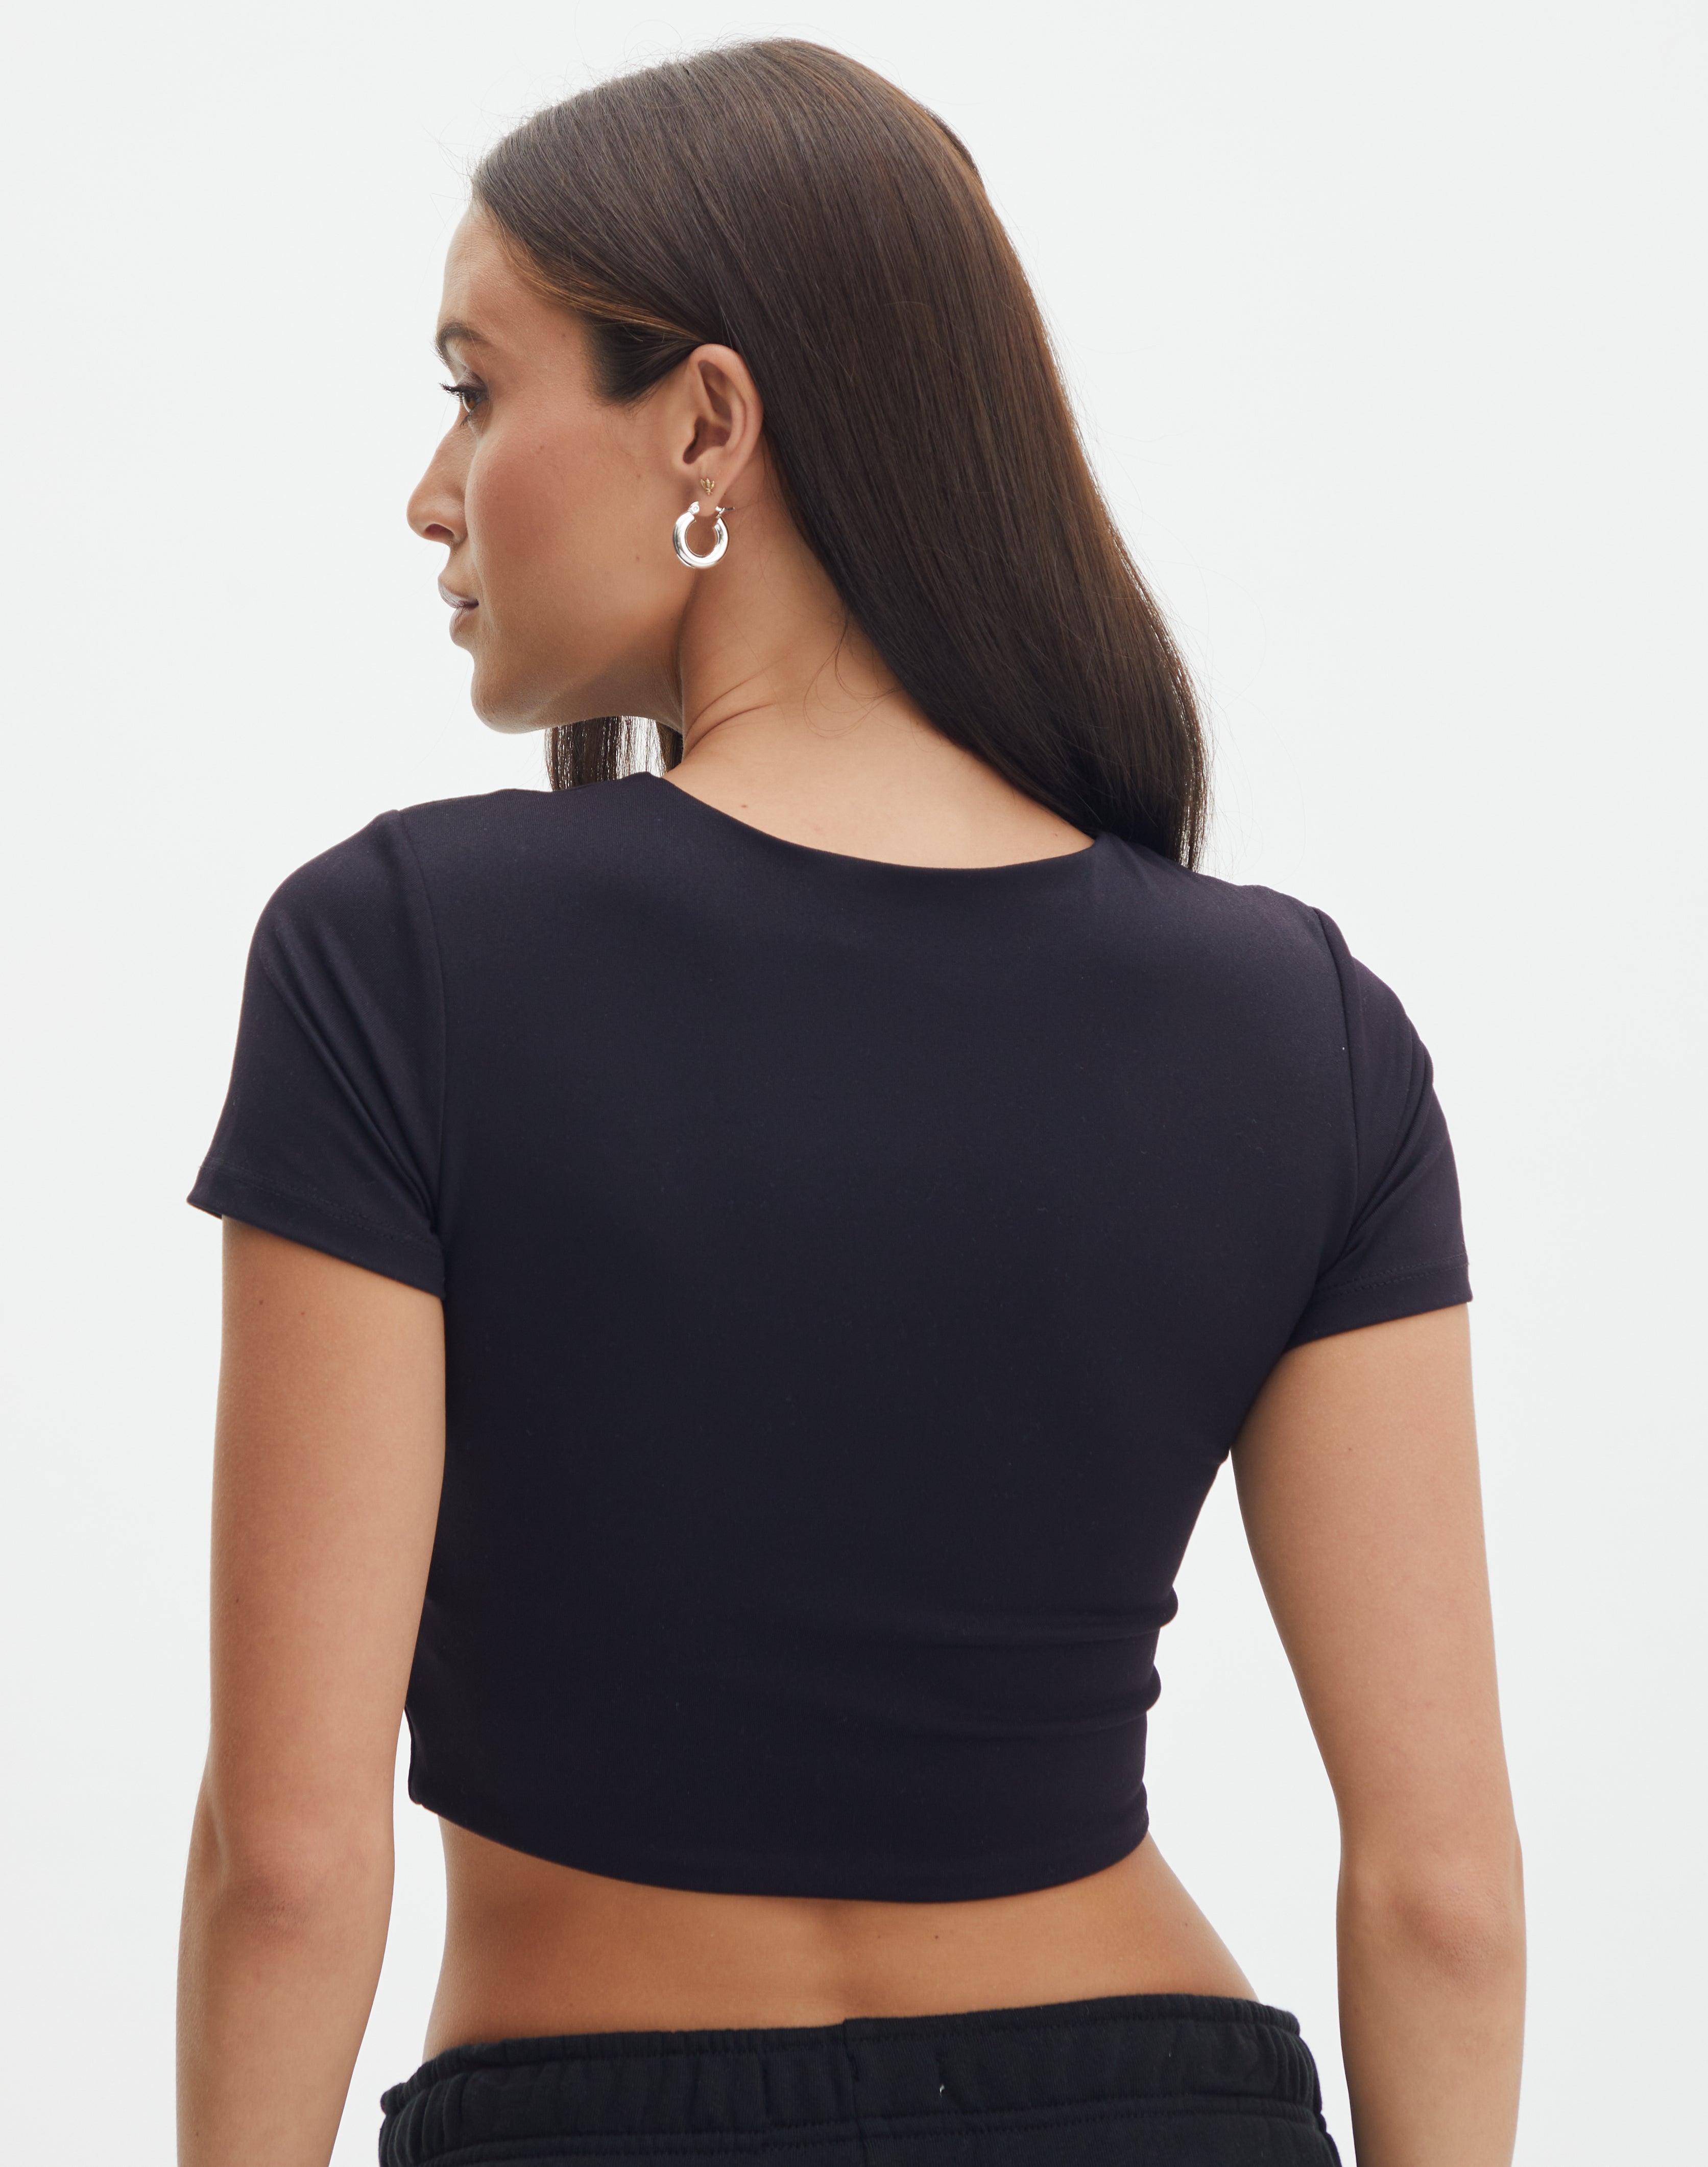 https://www.glassons.com/content/products/pikko-peachy-tank-black-back-ts106858pch.jpg